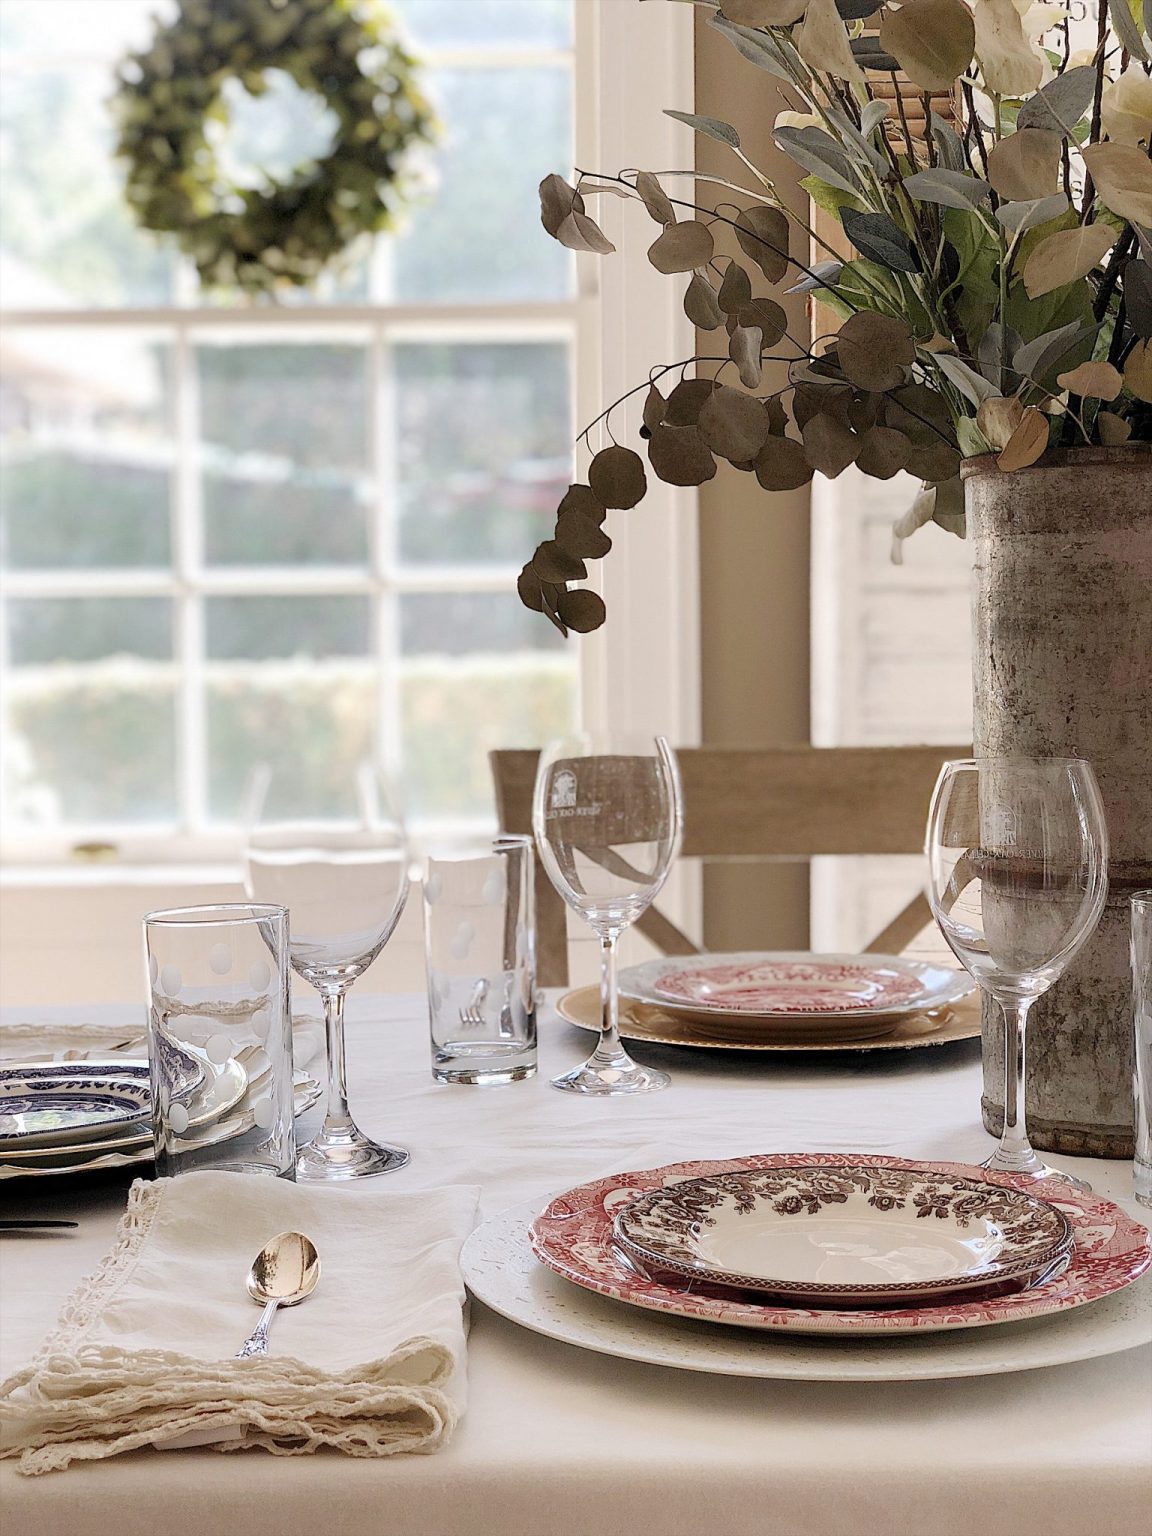 How to Mix China Patterns When You Set the Table - MY 100 YEAR OLD HOME